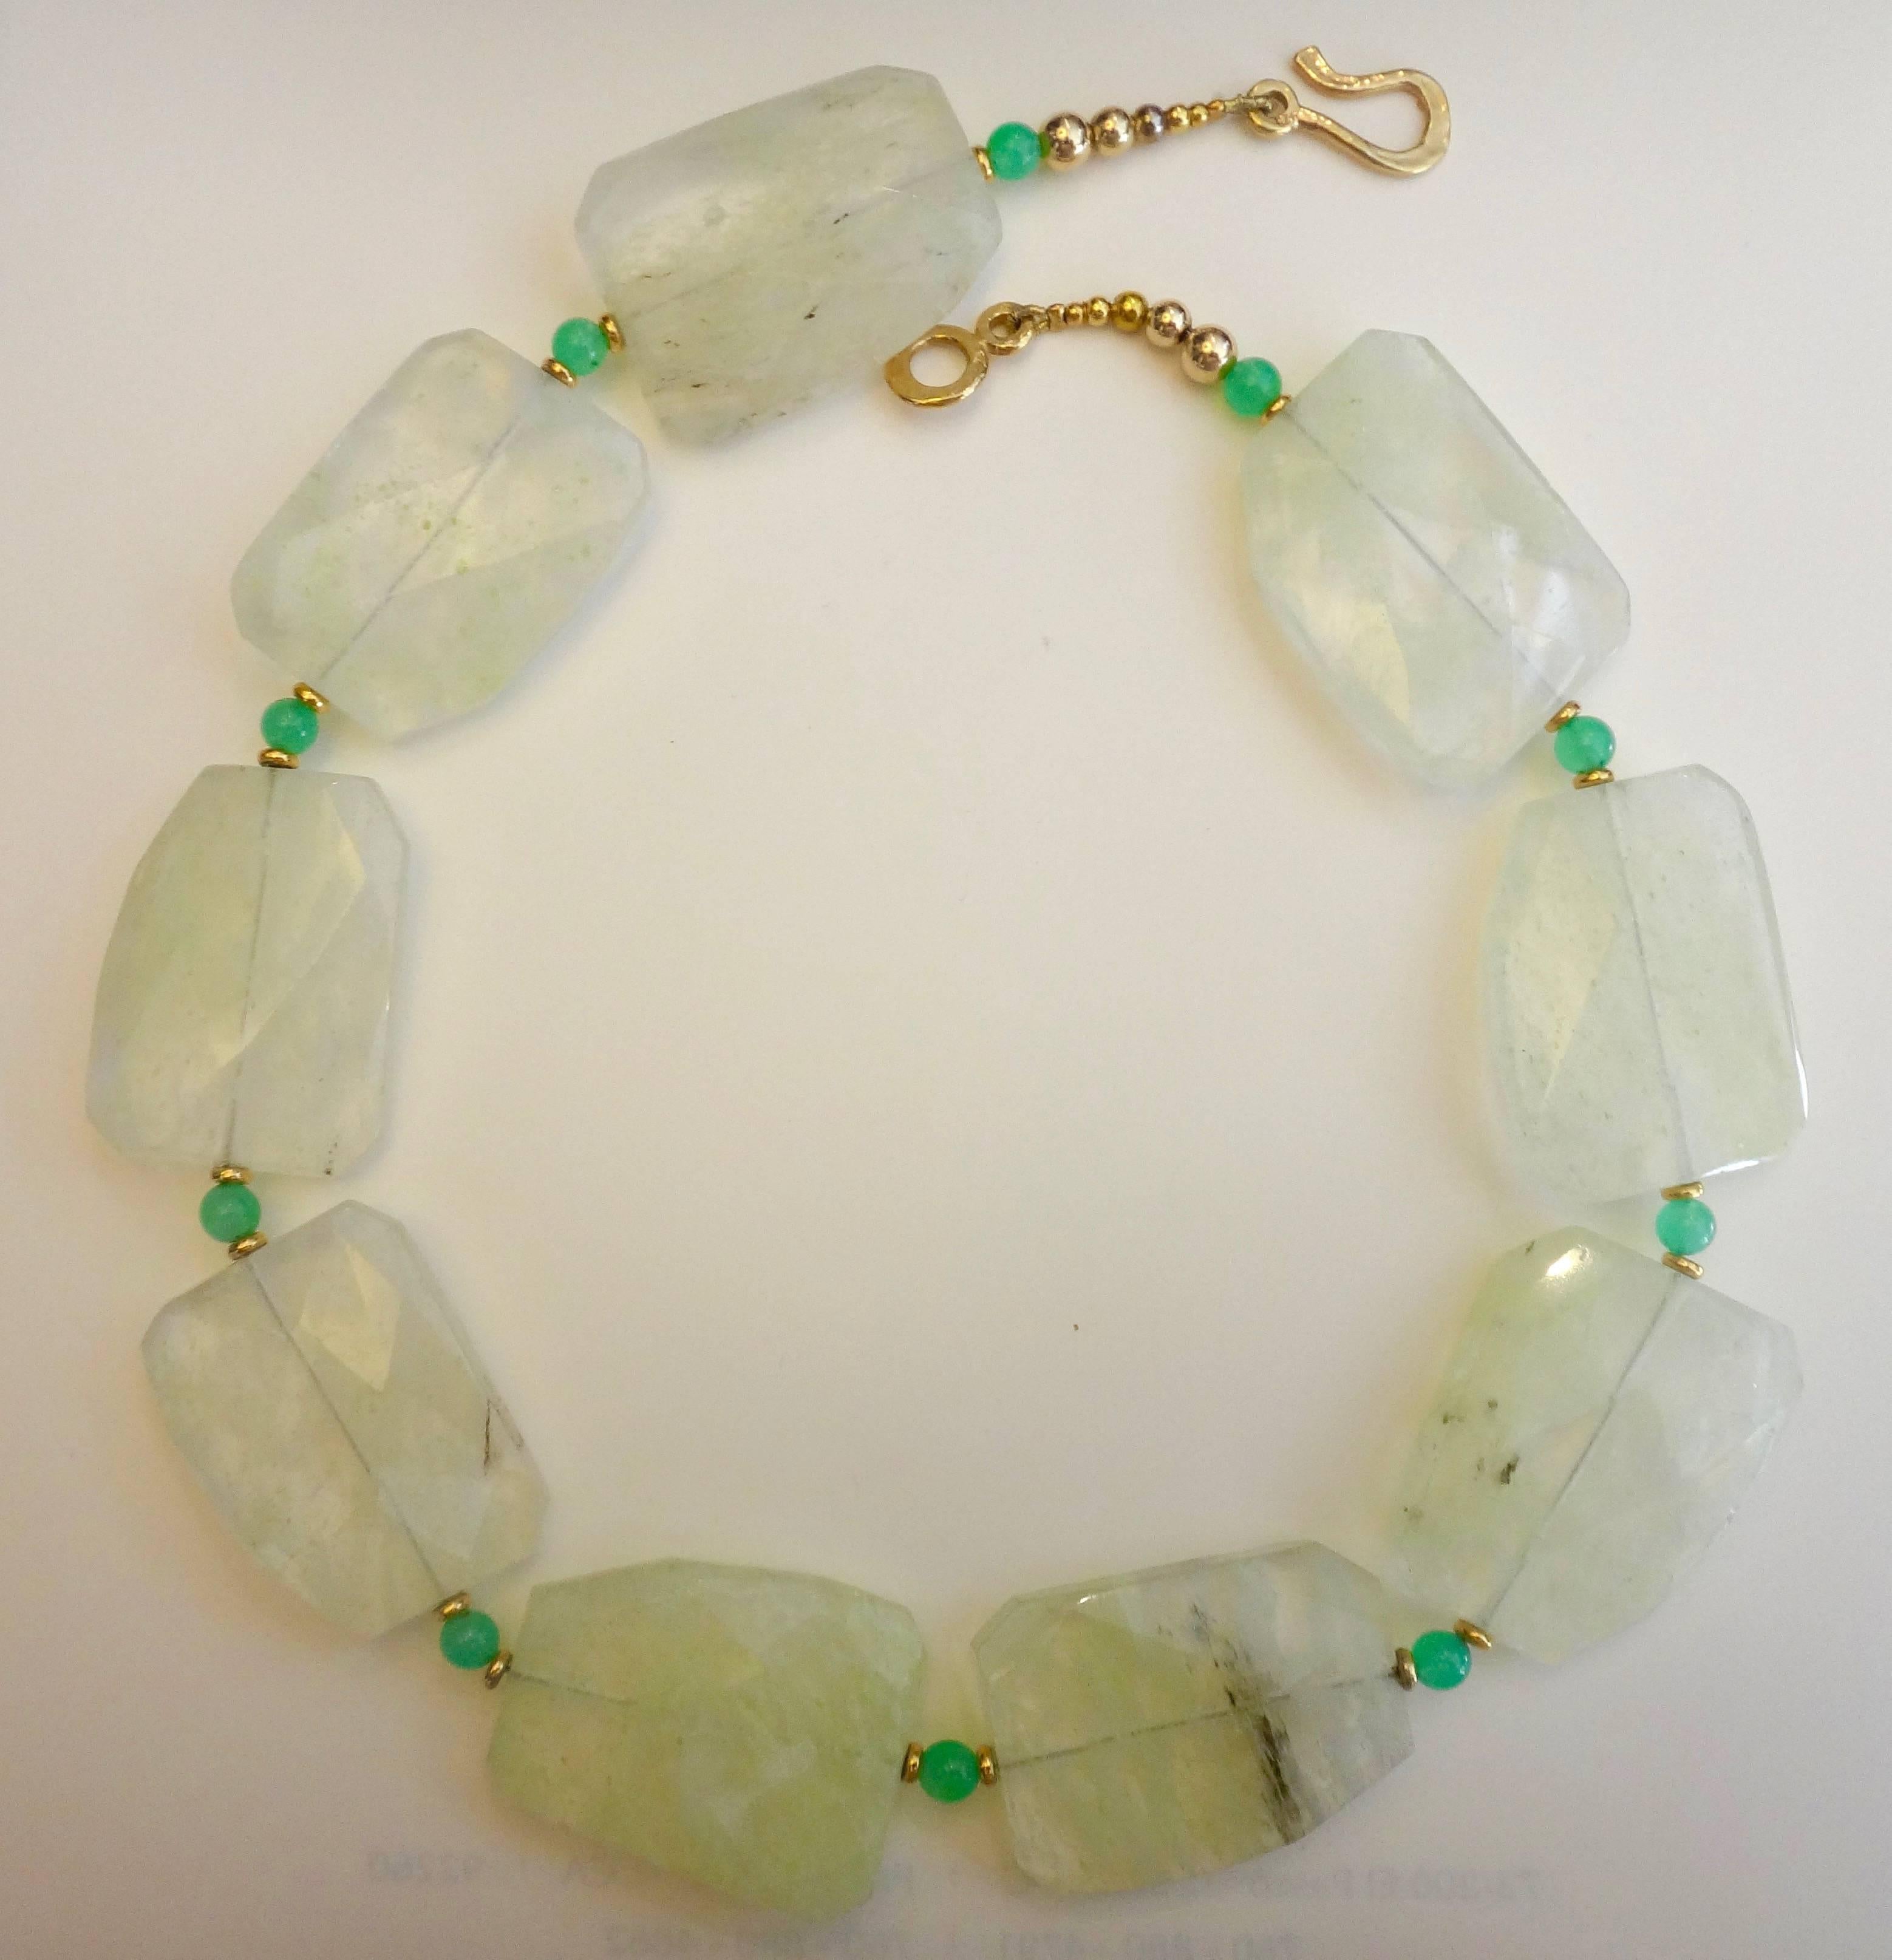 Irregularly shaped and faceted light green quartz beads are paired with green chrysophrase in this dramatic necklace.  Gold spacer beads add depth and interest.  The necklace measures 21 inches and is finished with a hammered vermeil hook clasp.  